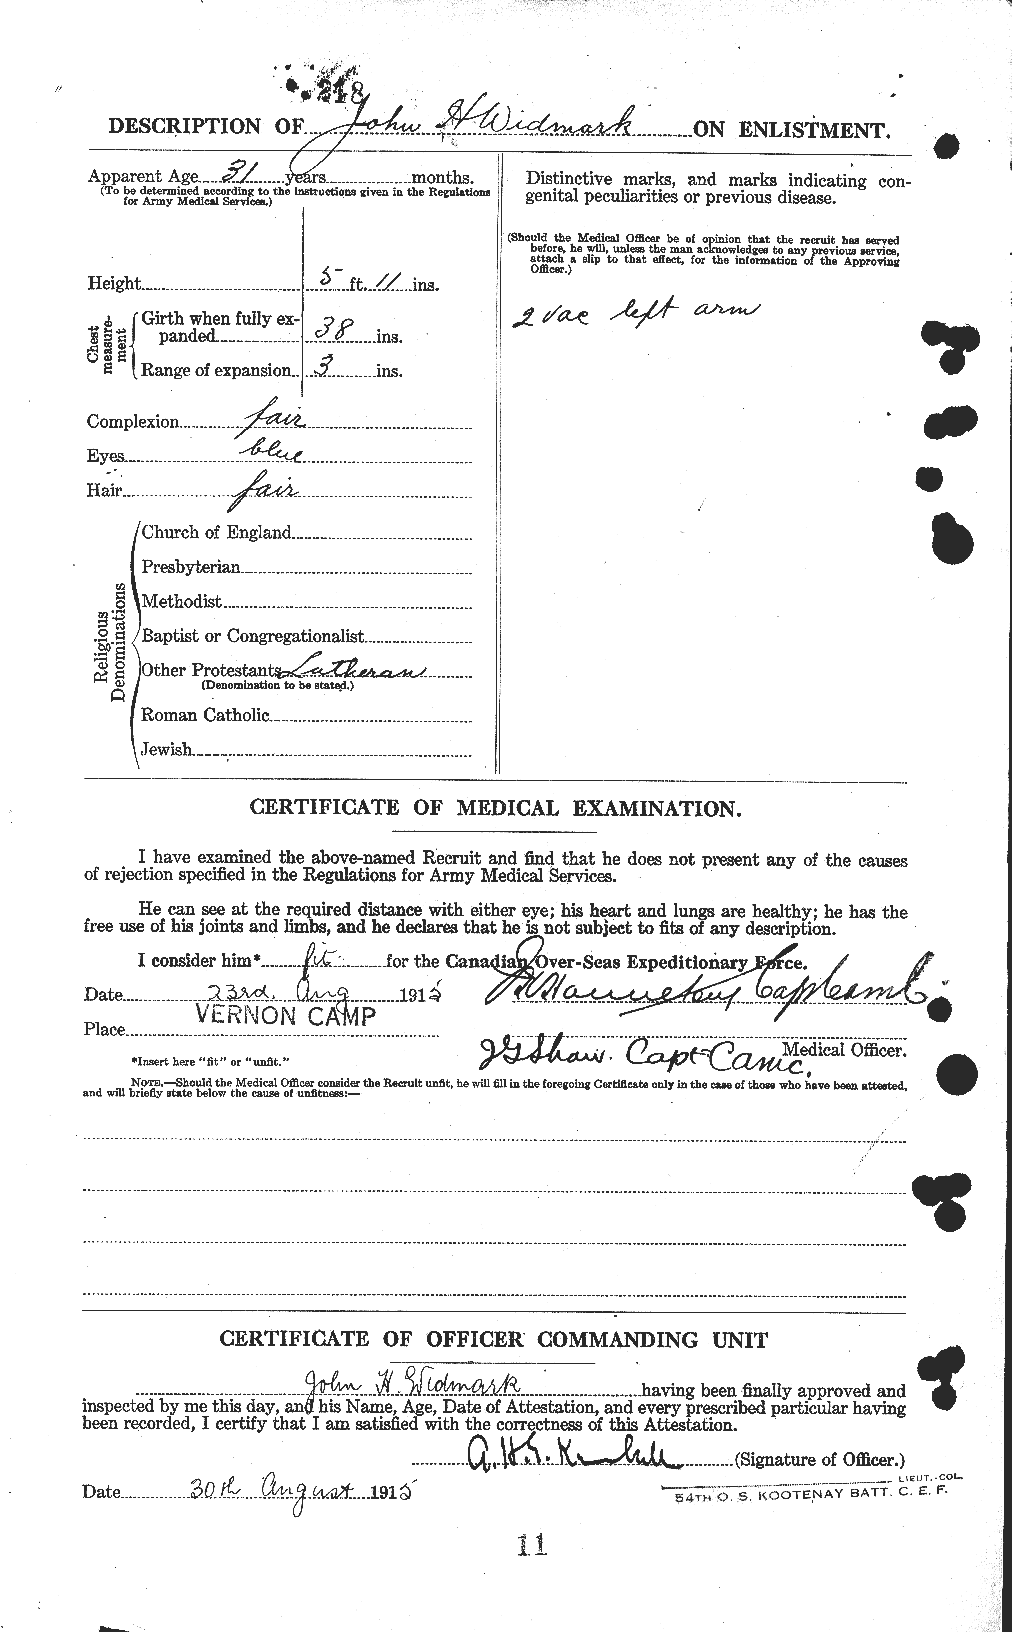 Personnel Records of the First World War - CEF 674118b